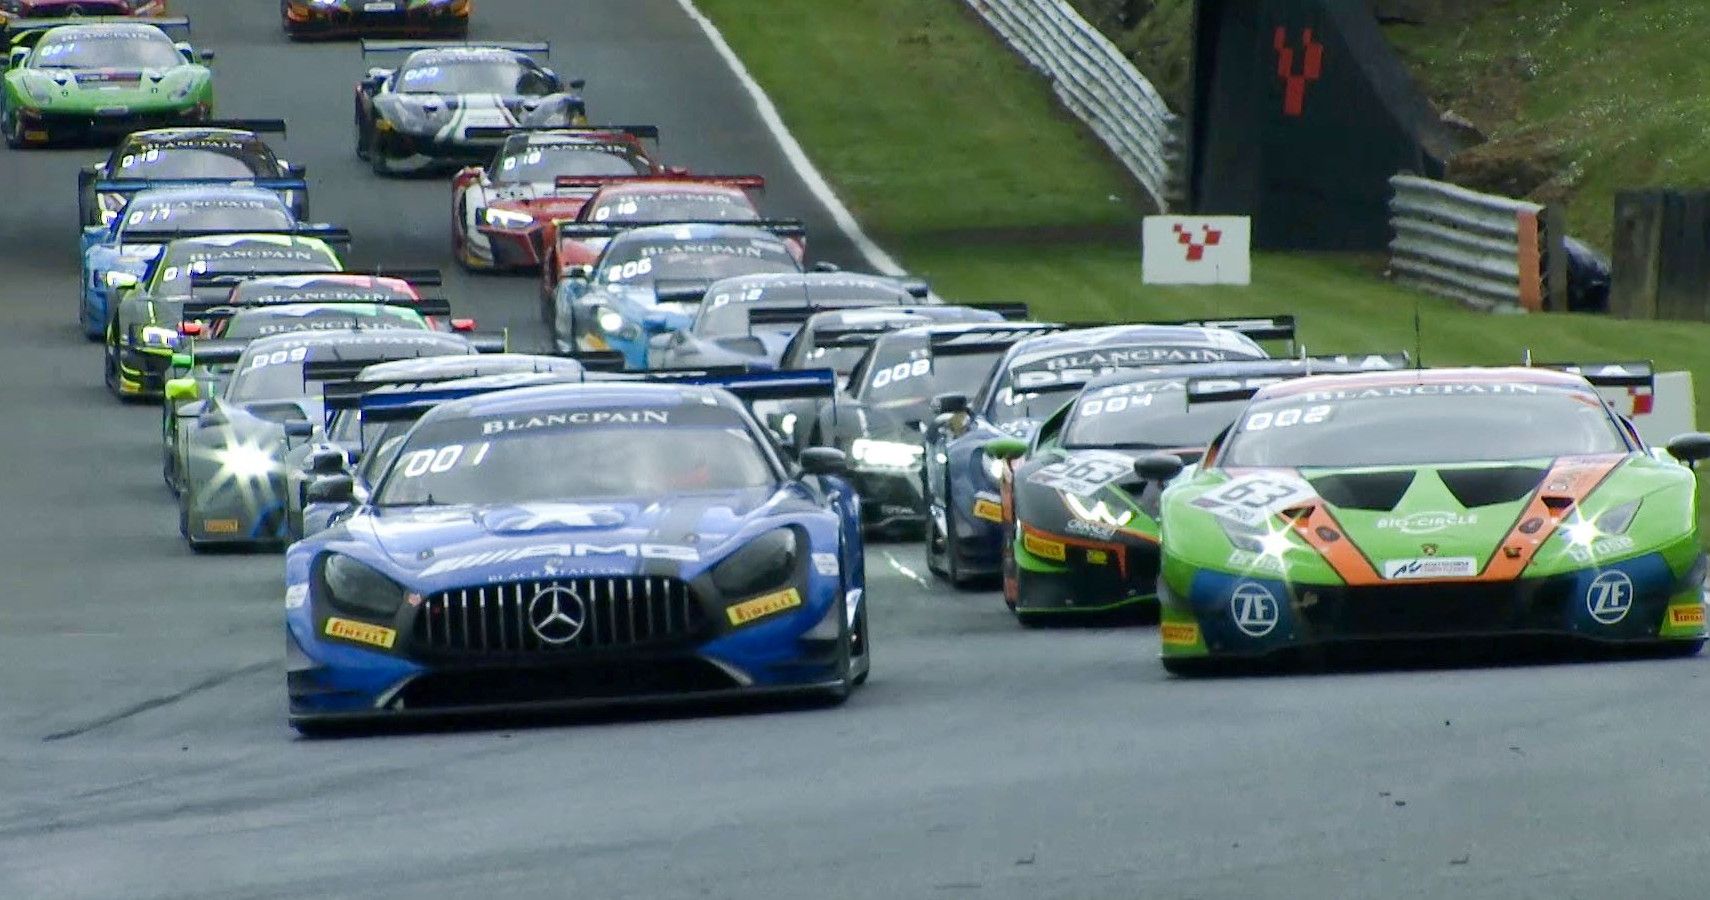 SRO's GT World Challenge offers production racing in the US